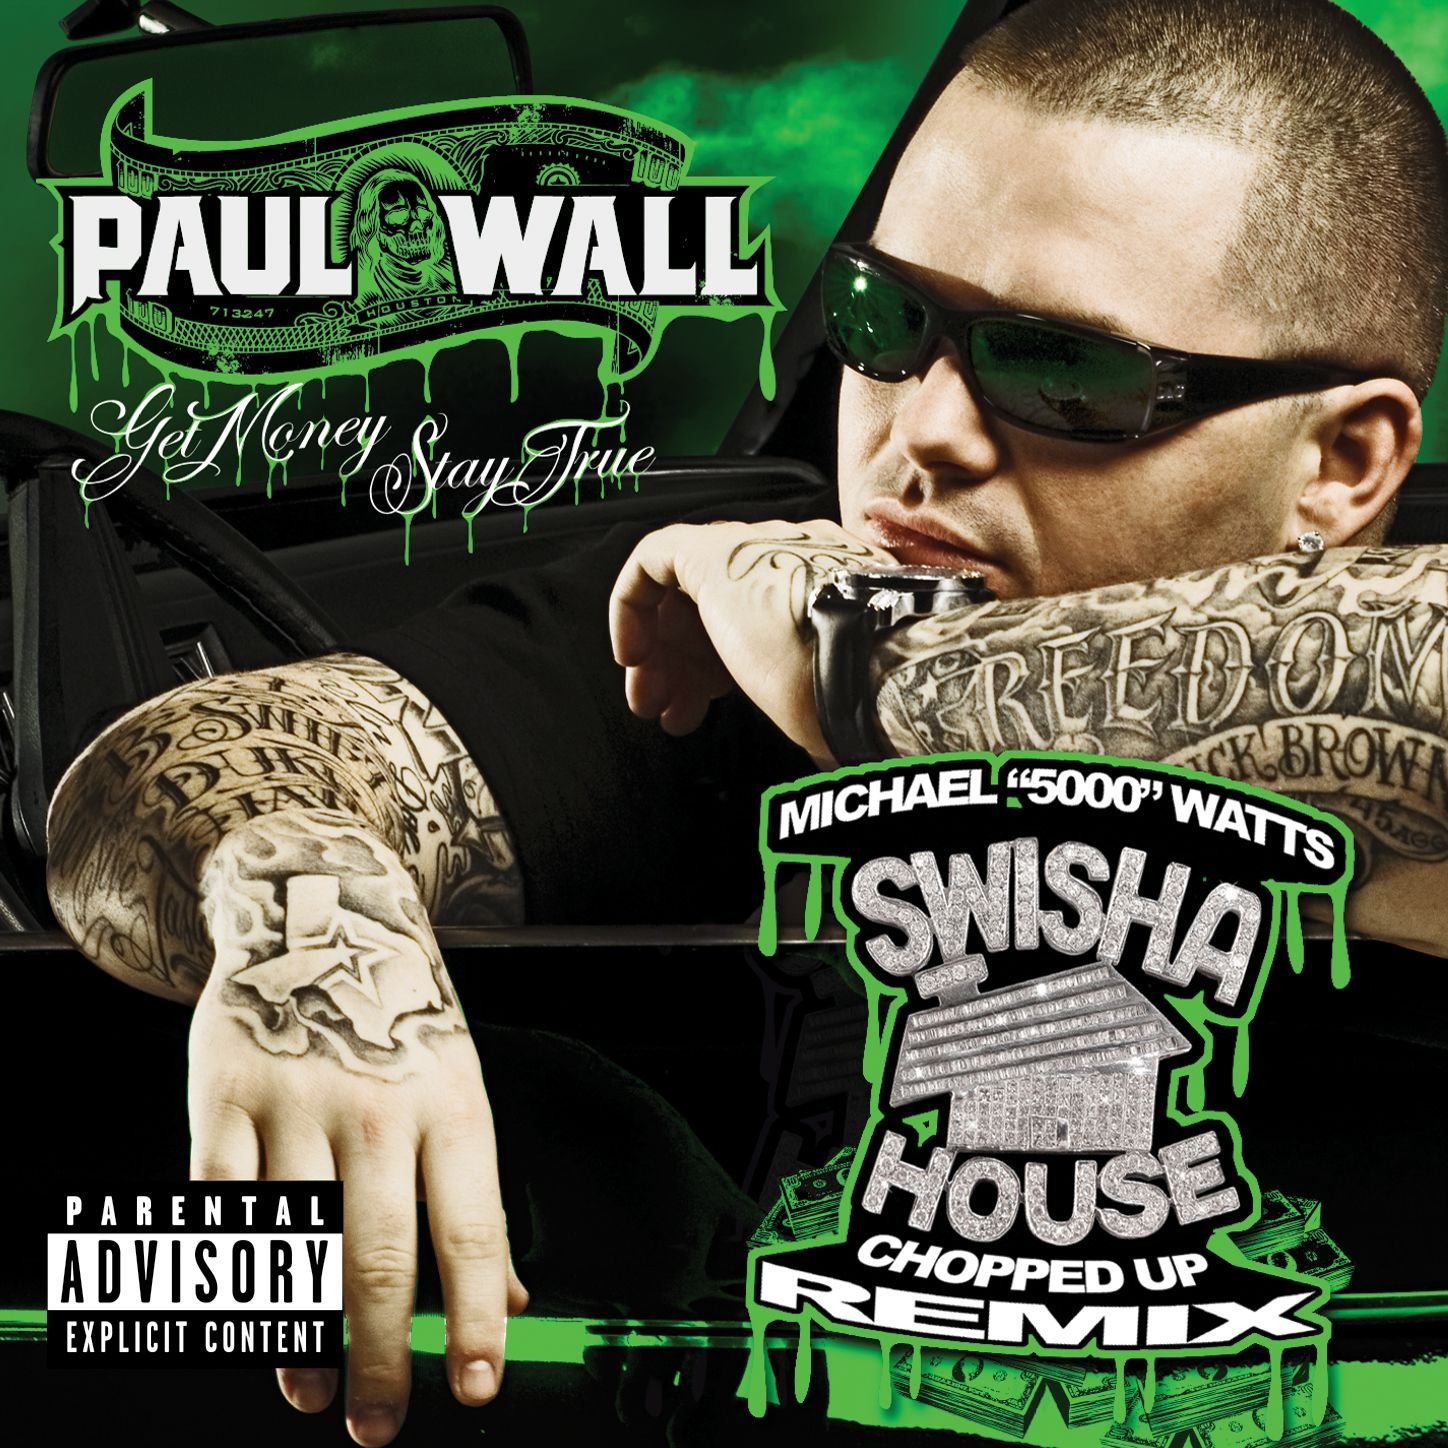 Paul Wall - Get Money Stay True Swishahouse Chopped Up Remix (2007) FLAC Download